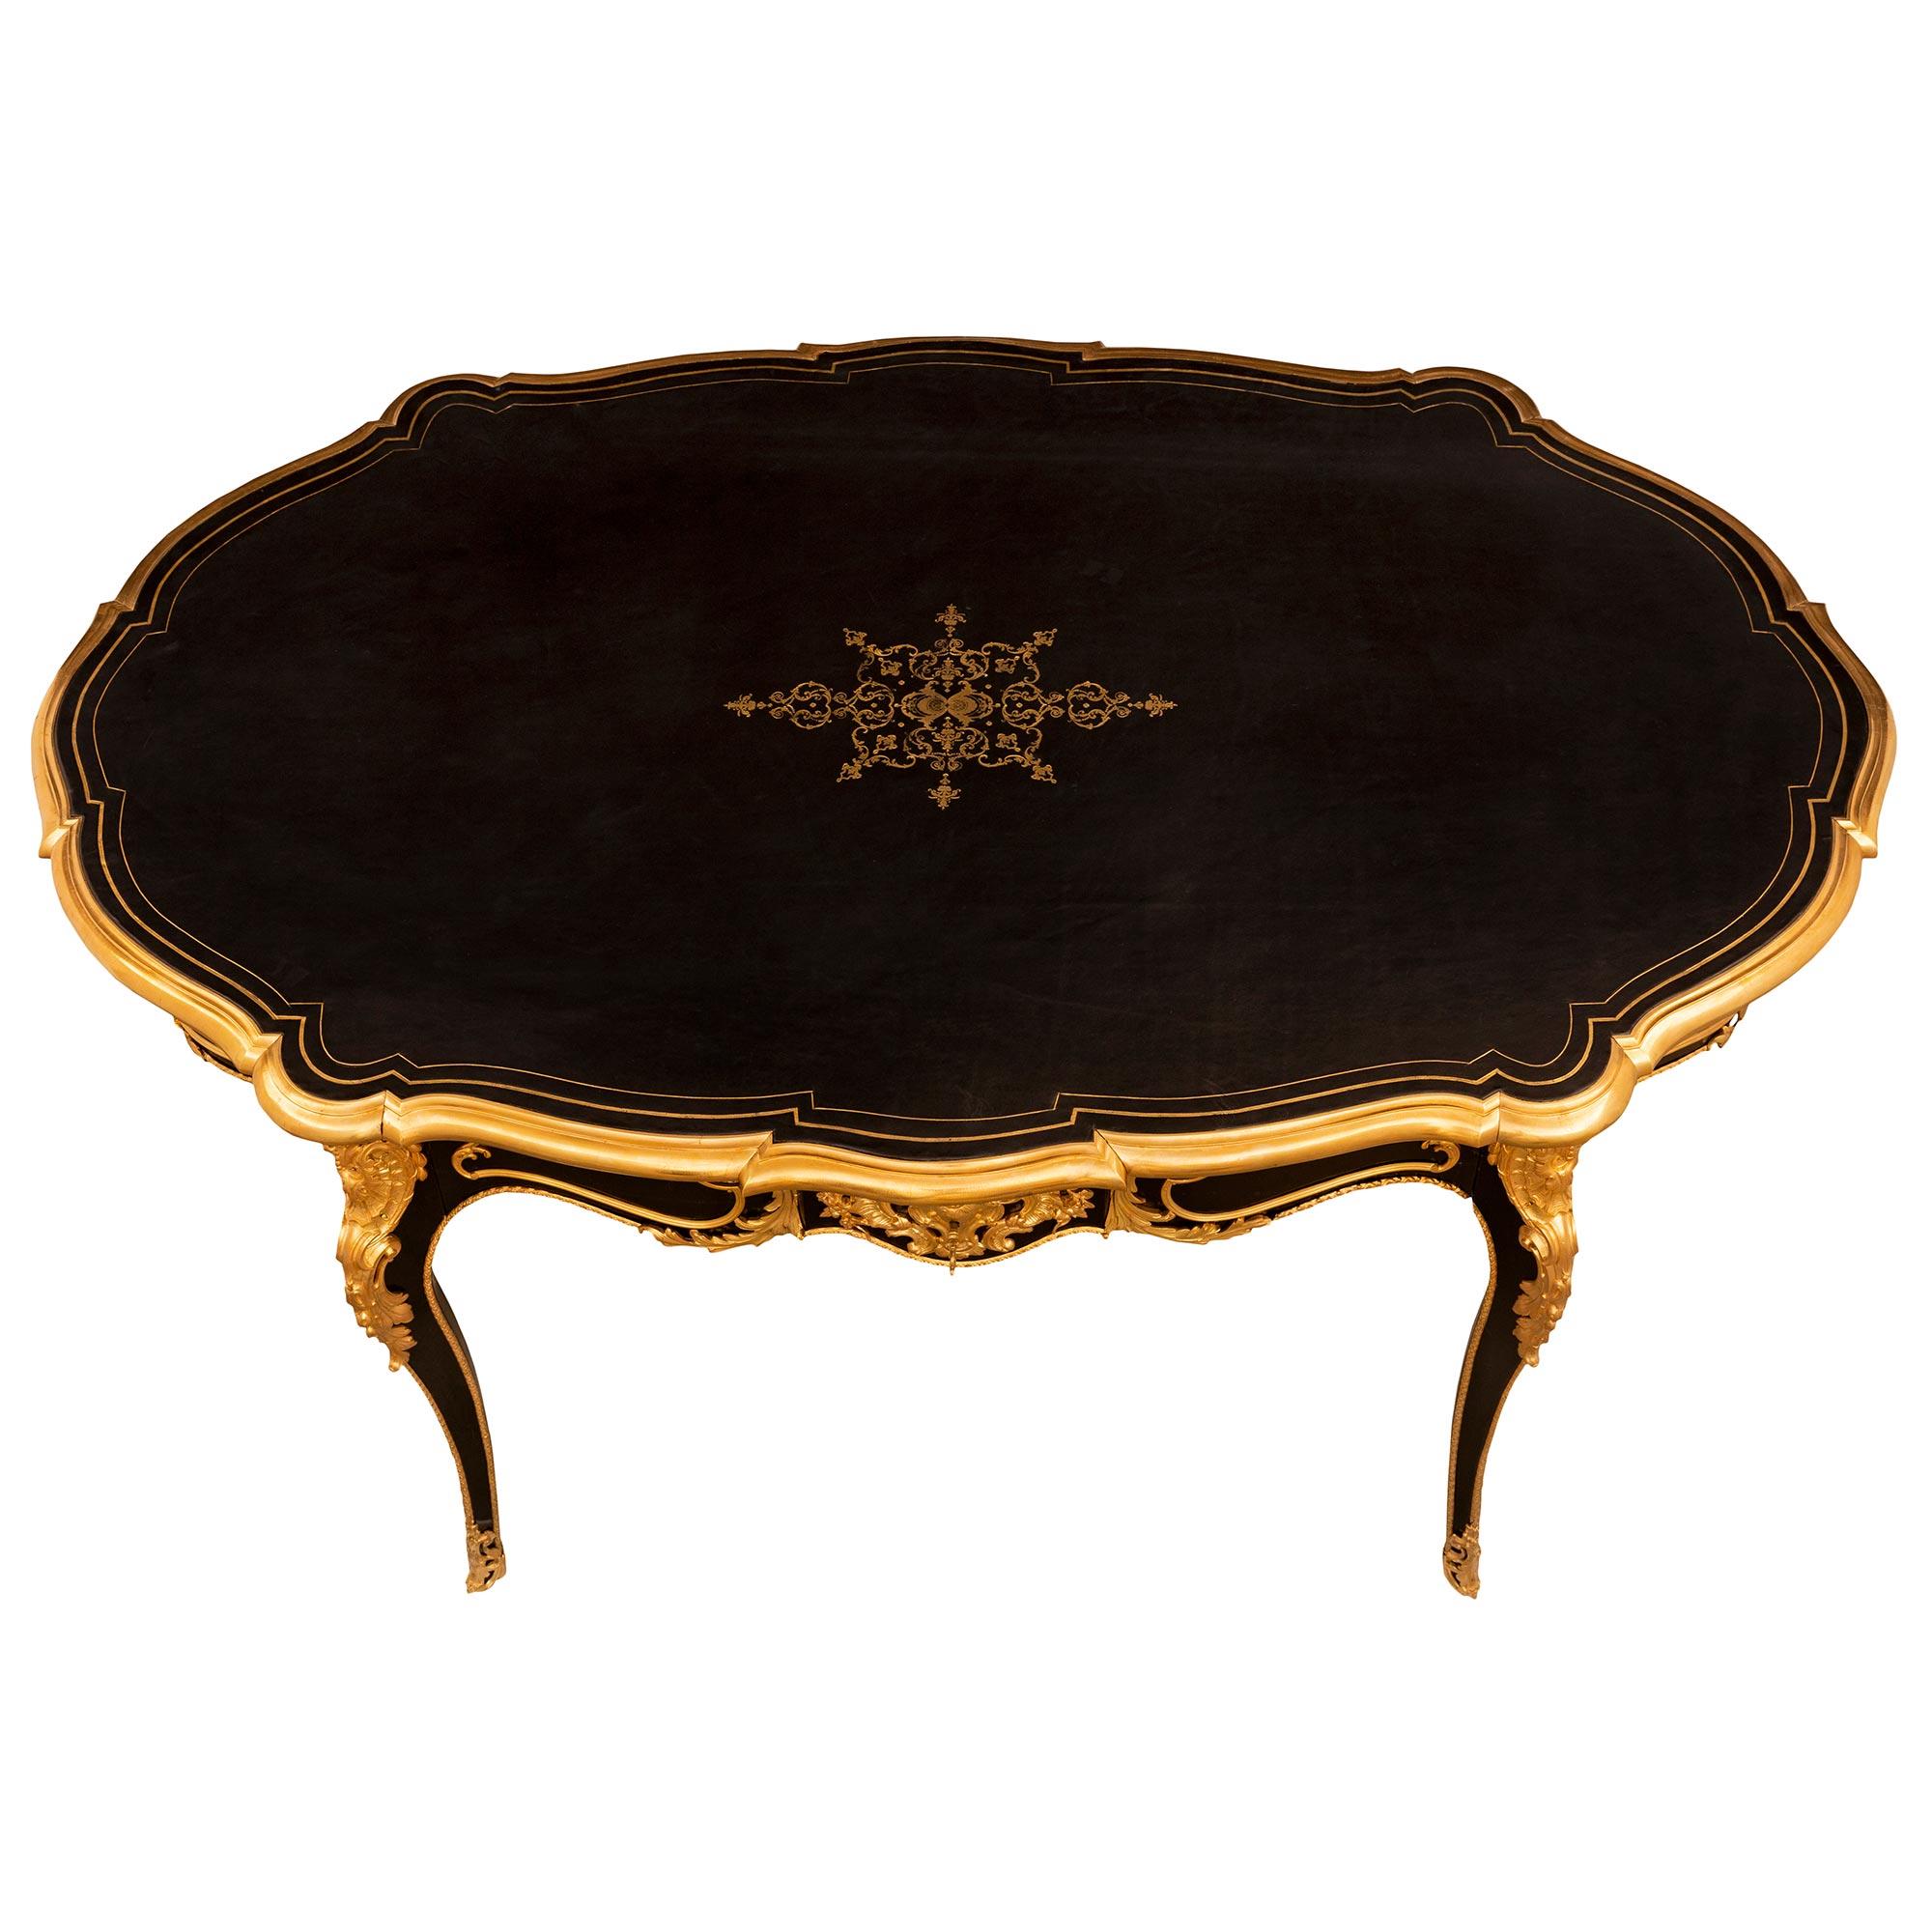 A most elegant and very high quality French 19th century Louis XV st. Napoleon III period ebony and ormolu center table/desk. The table is raised by very slender cabriole legs with exquisite pierced fitted foliate ormolu sabots with exceptional